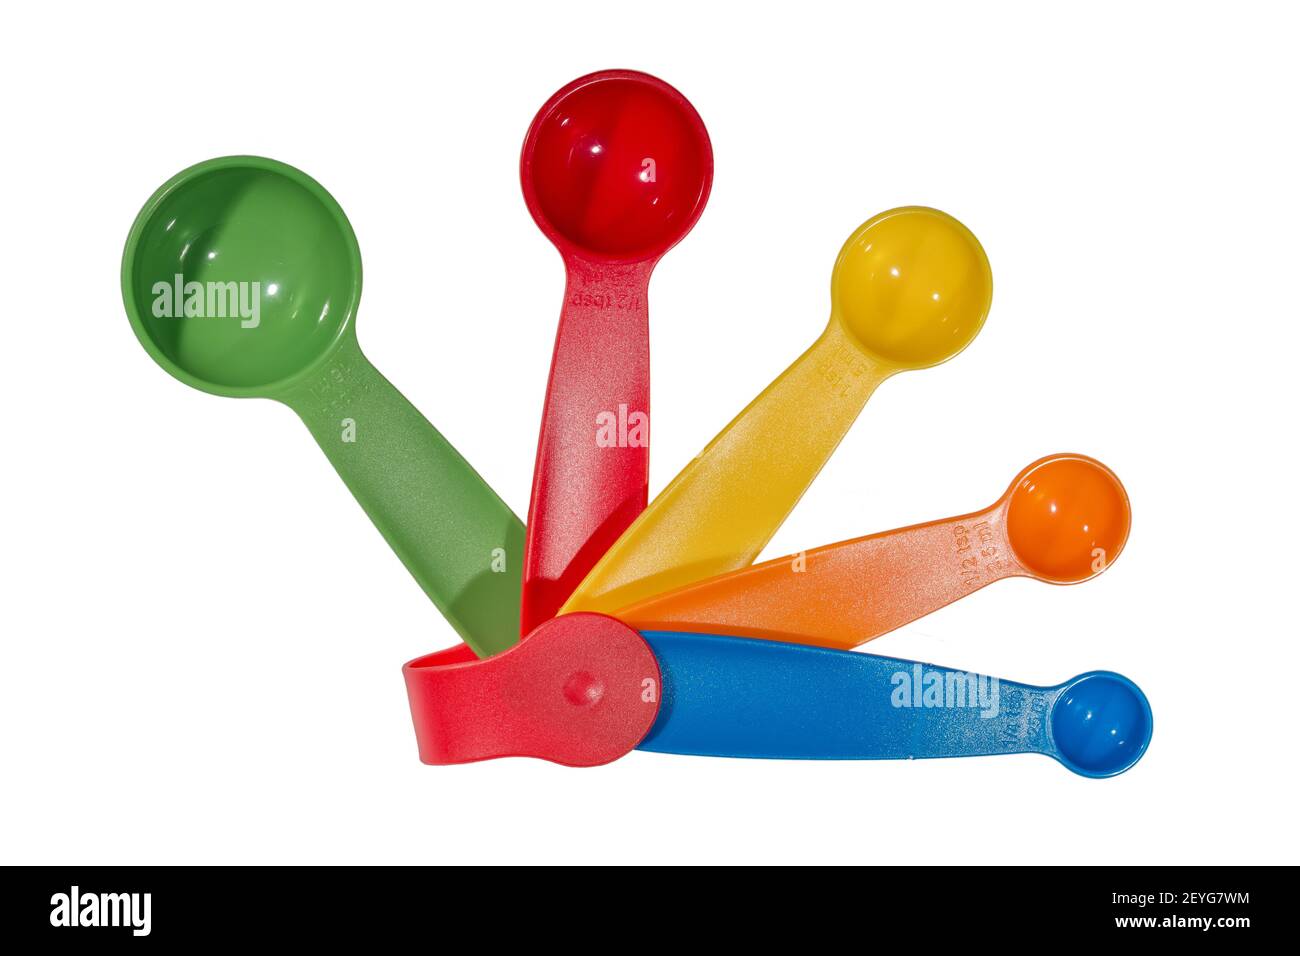 A colorful set of plastic measuring spoons in sizes from 1 tablespoon to 1/4 of a teaspoon Stock Photo